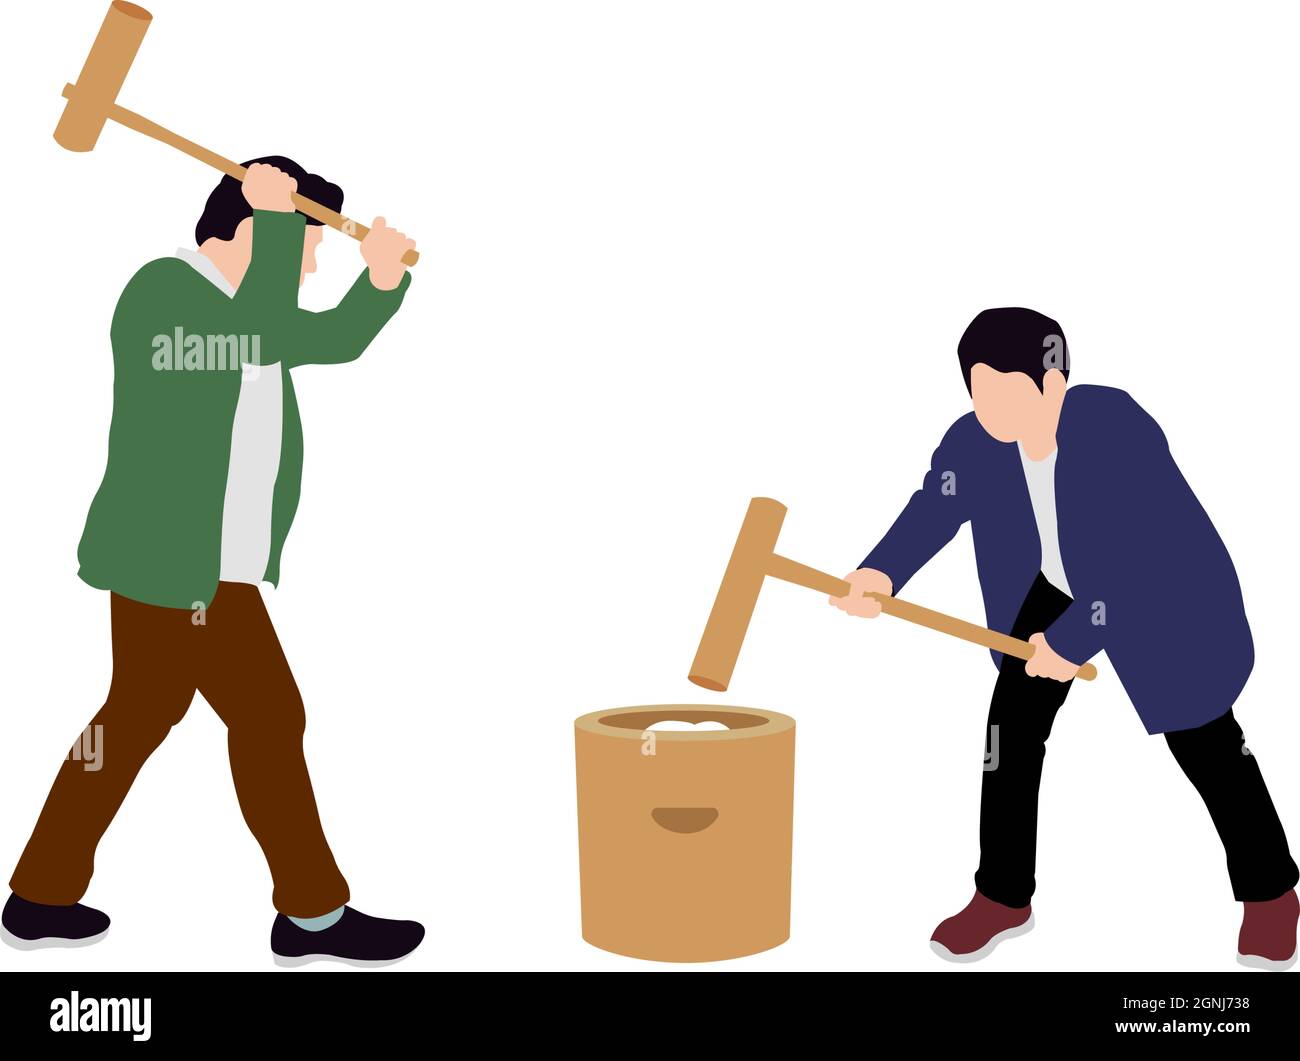 Silhouette men ( rice cake pounding | Japanese traditional new year’s event ) vector illustration Stock Vector